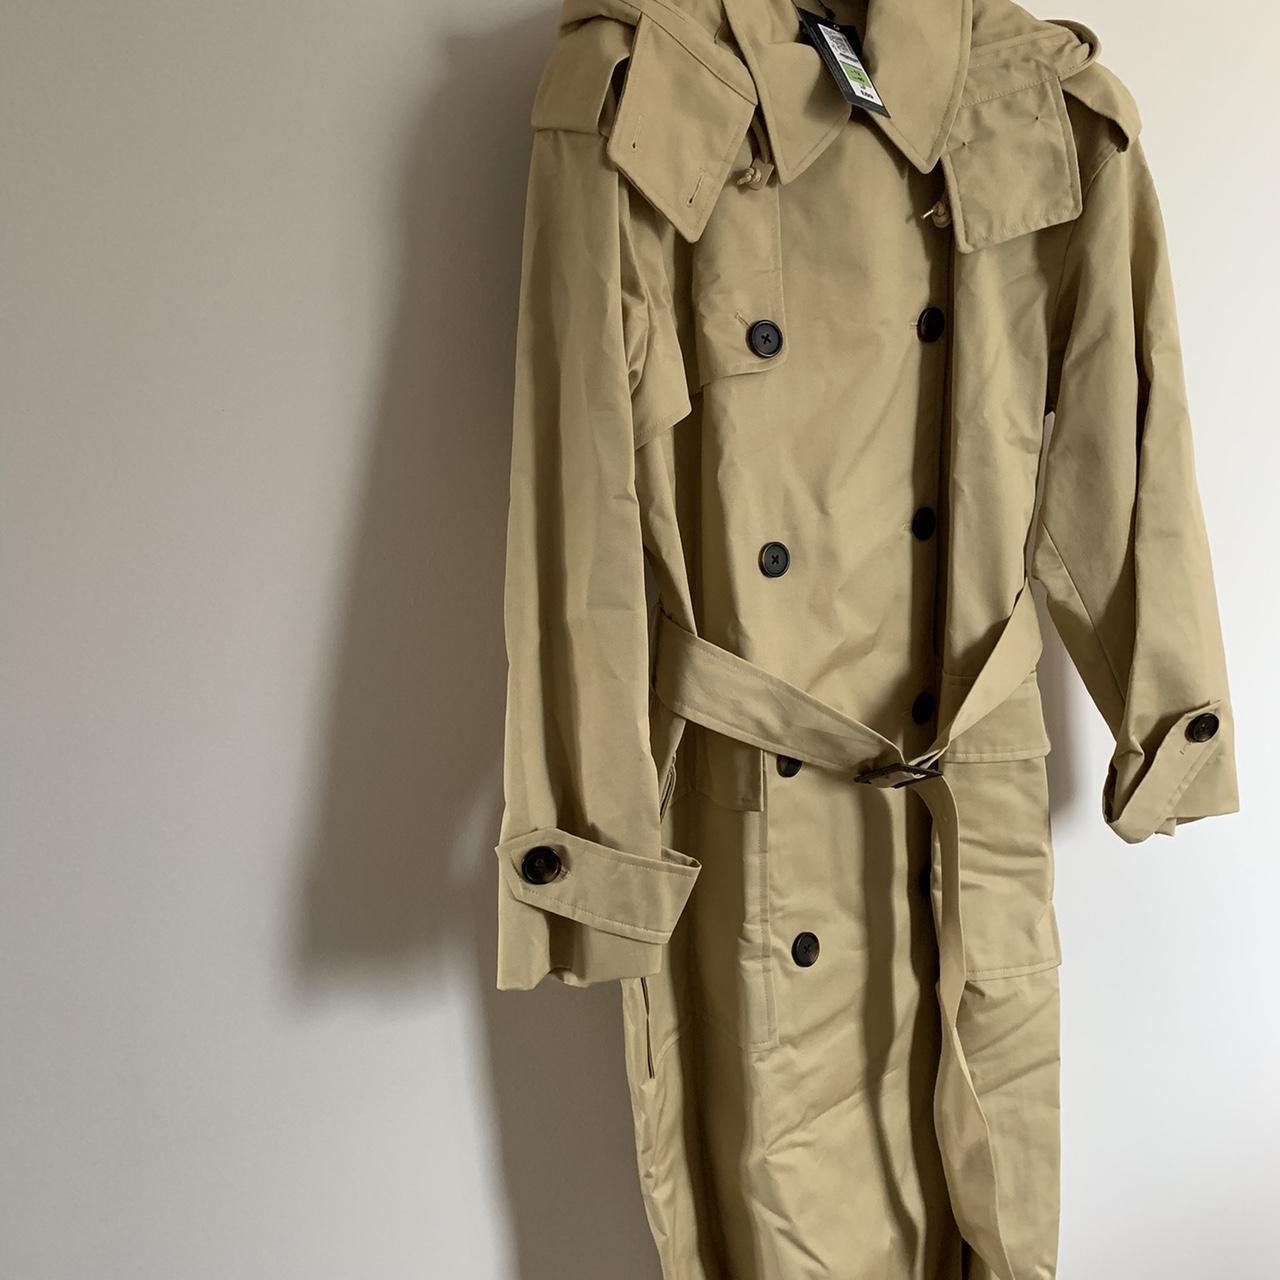 Marks and spencers classic trench coat. SIZE... - Depop